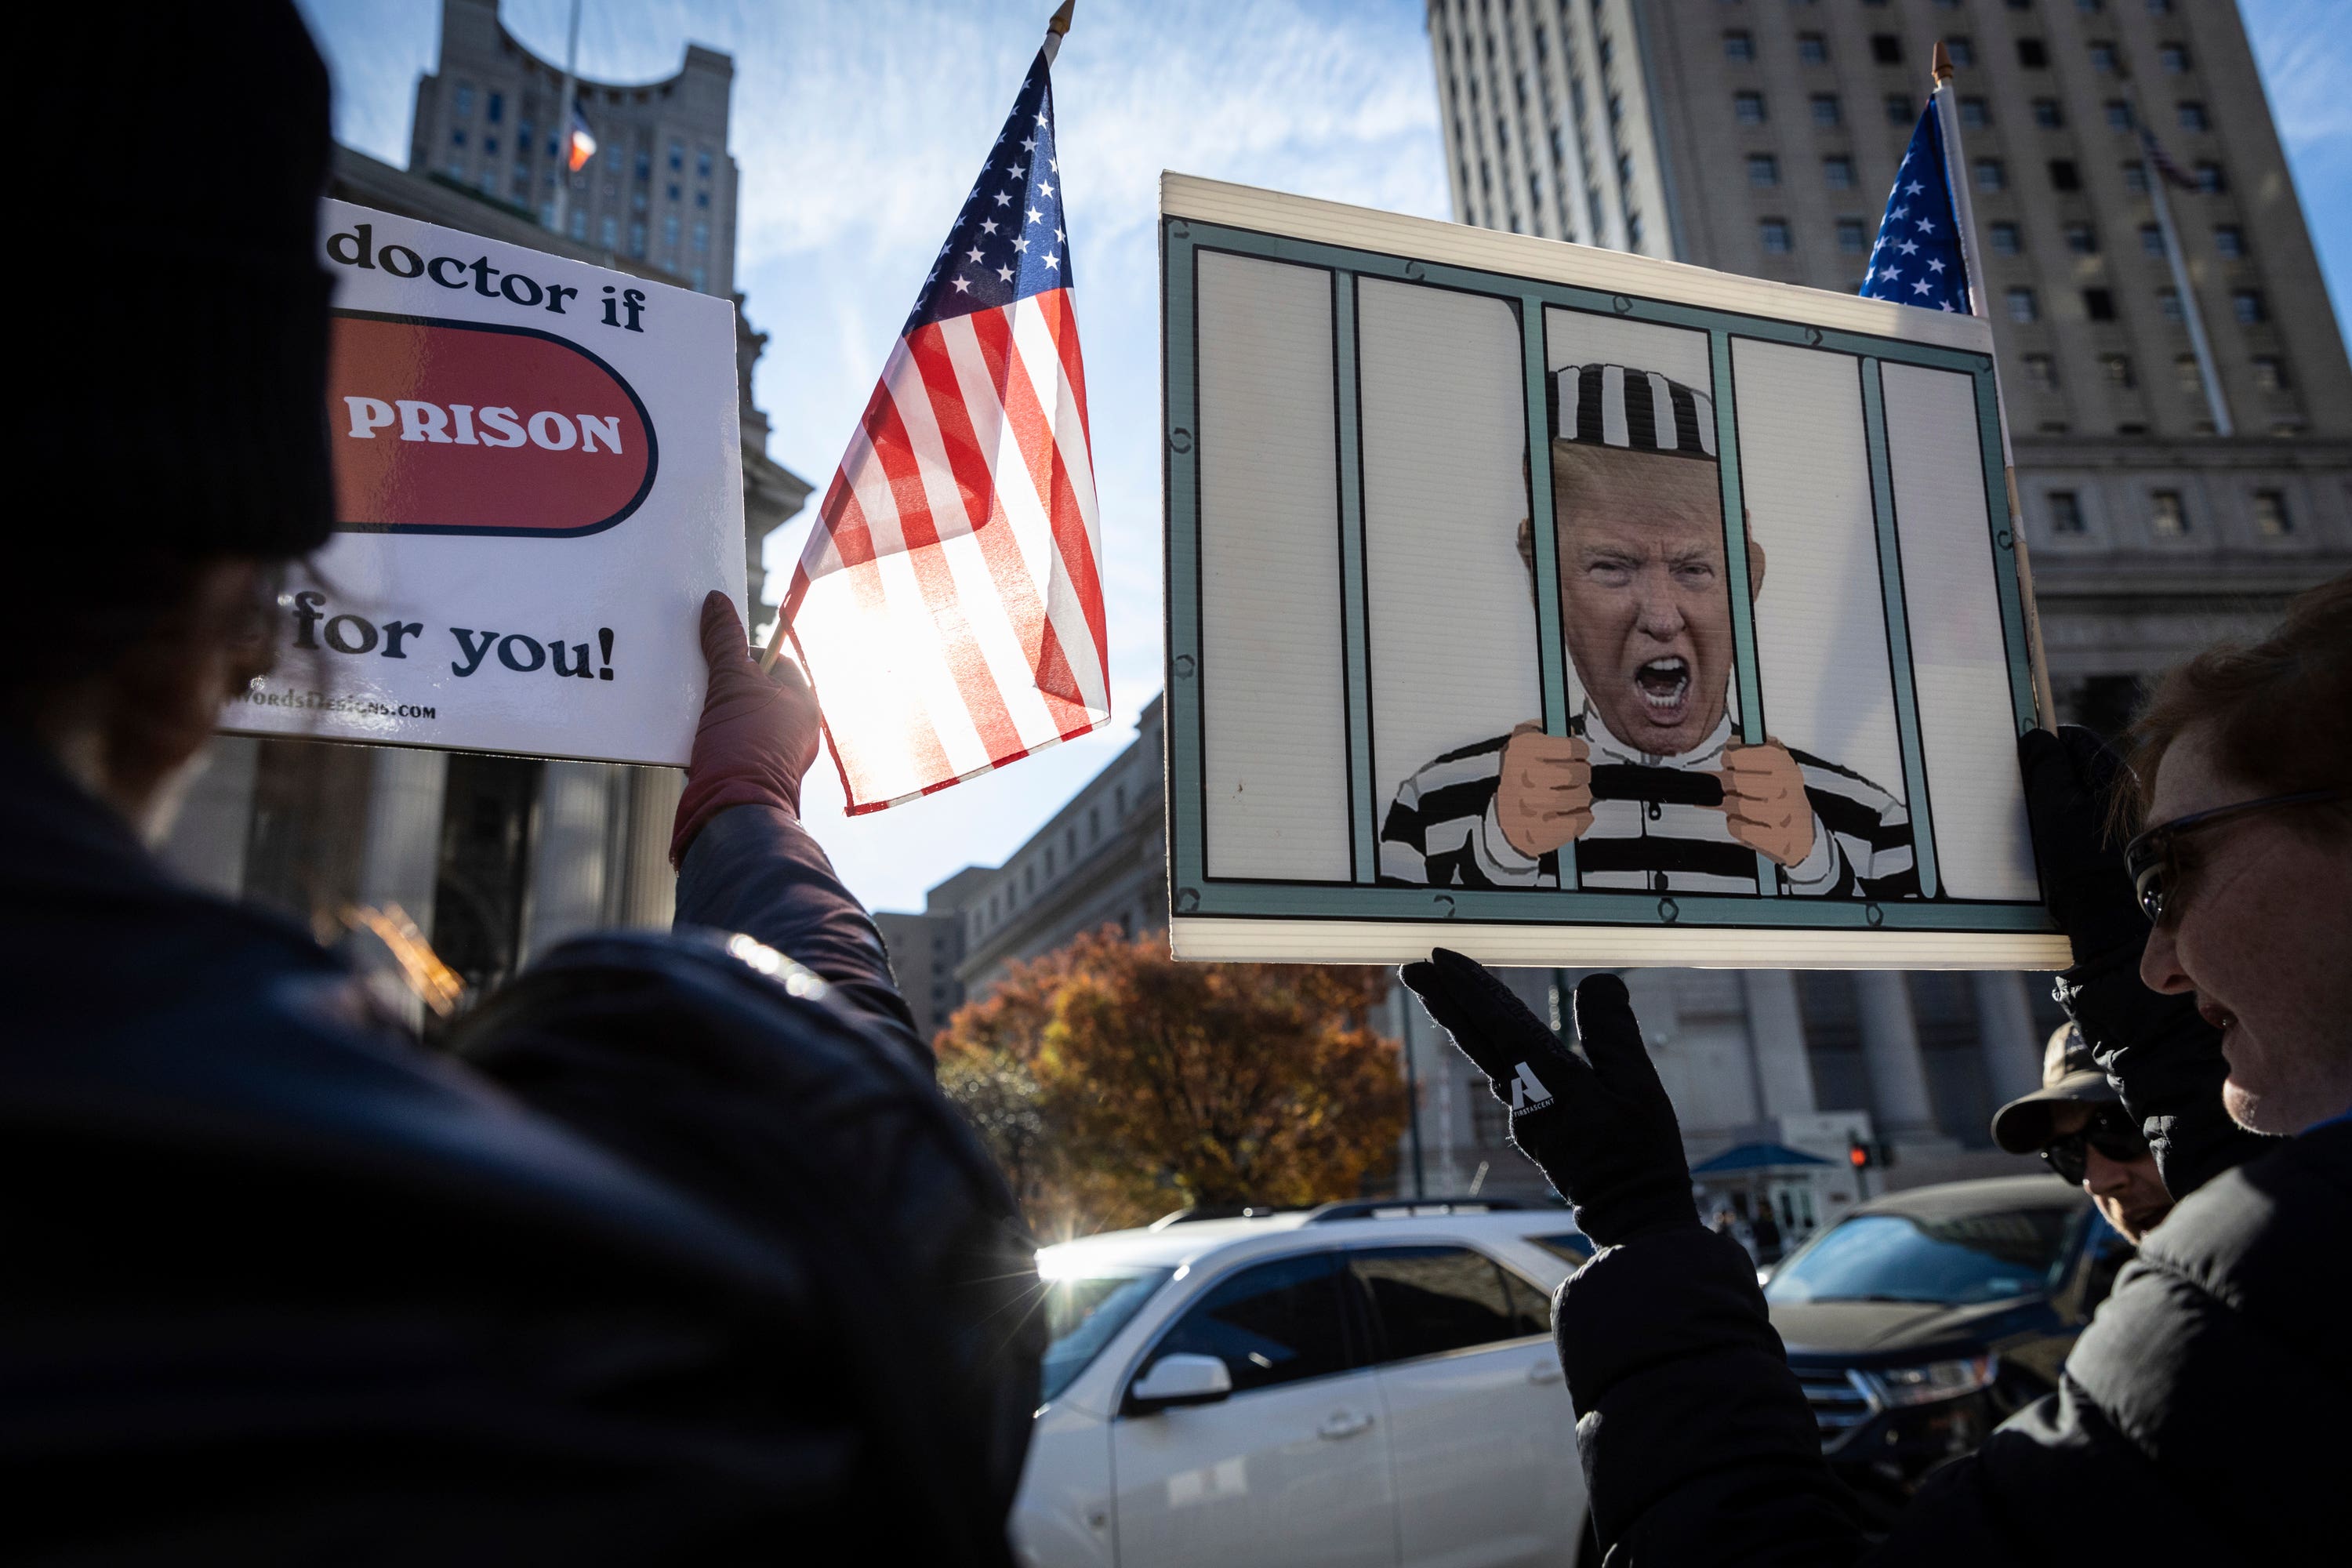 People protest against former president Donald Trump outside the New York Supreme Court.